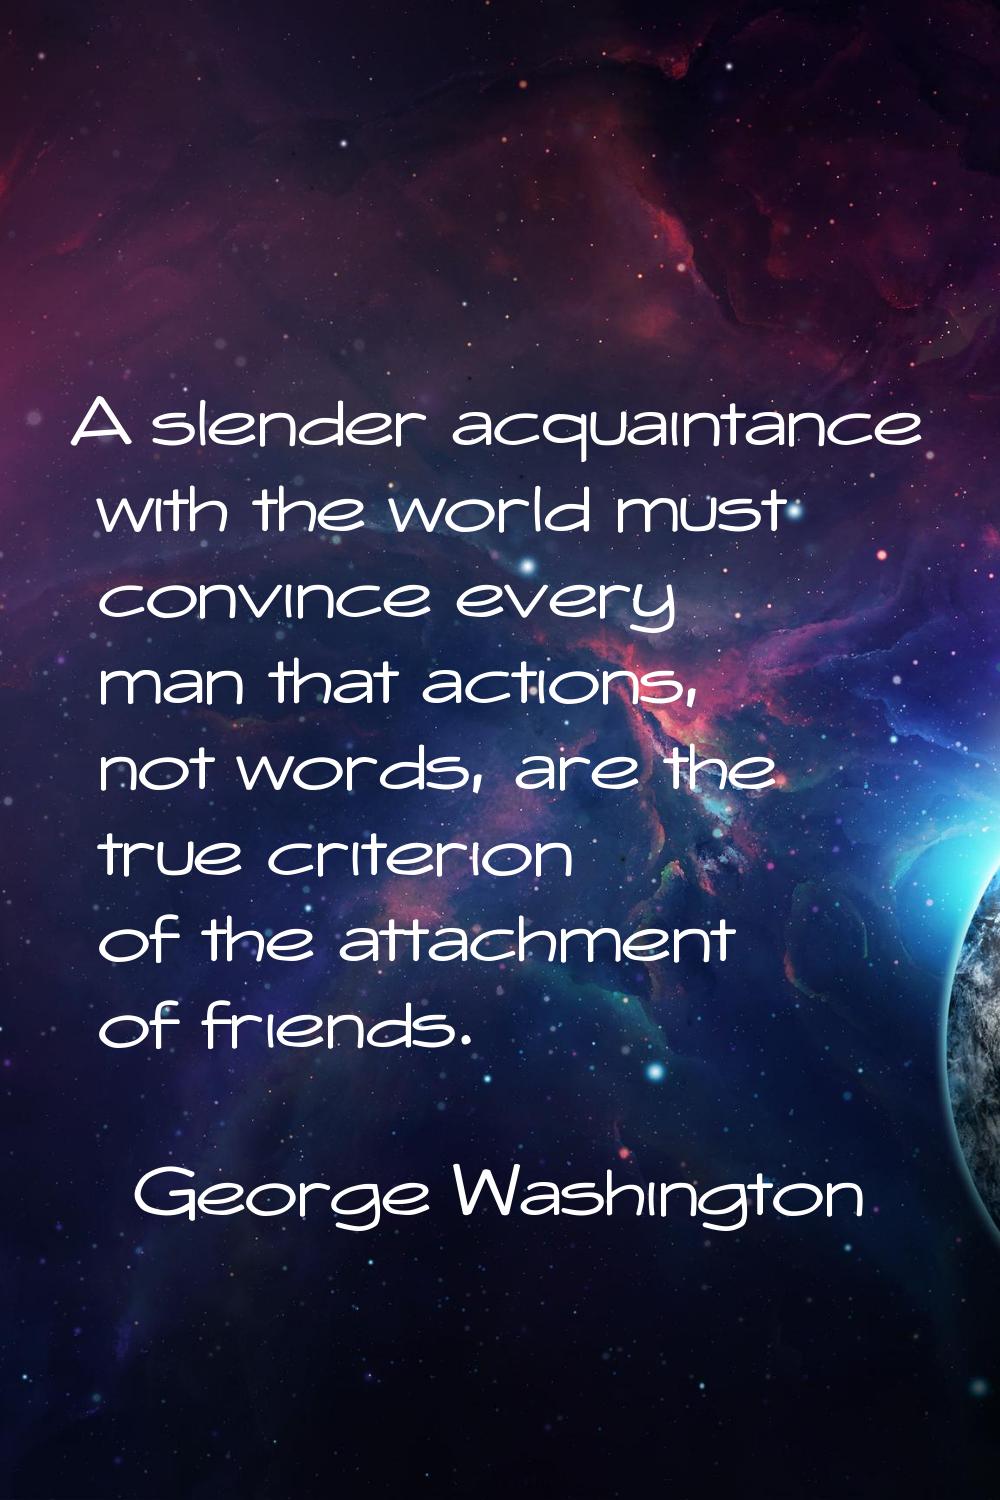 A slender acquaintance with the world must convince every man that actions, not words, are the true